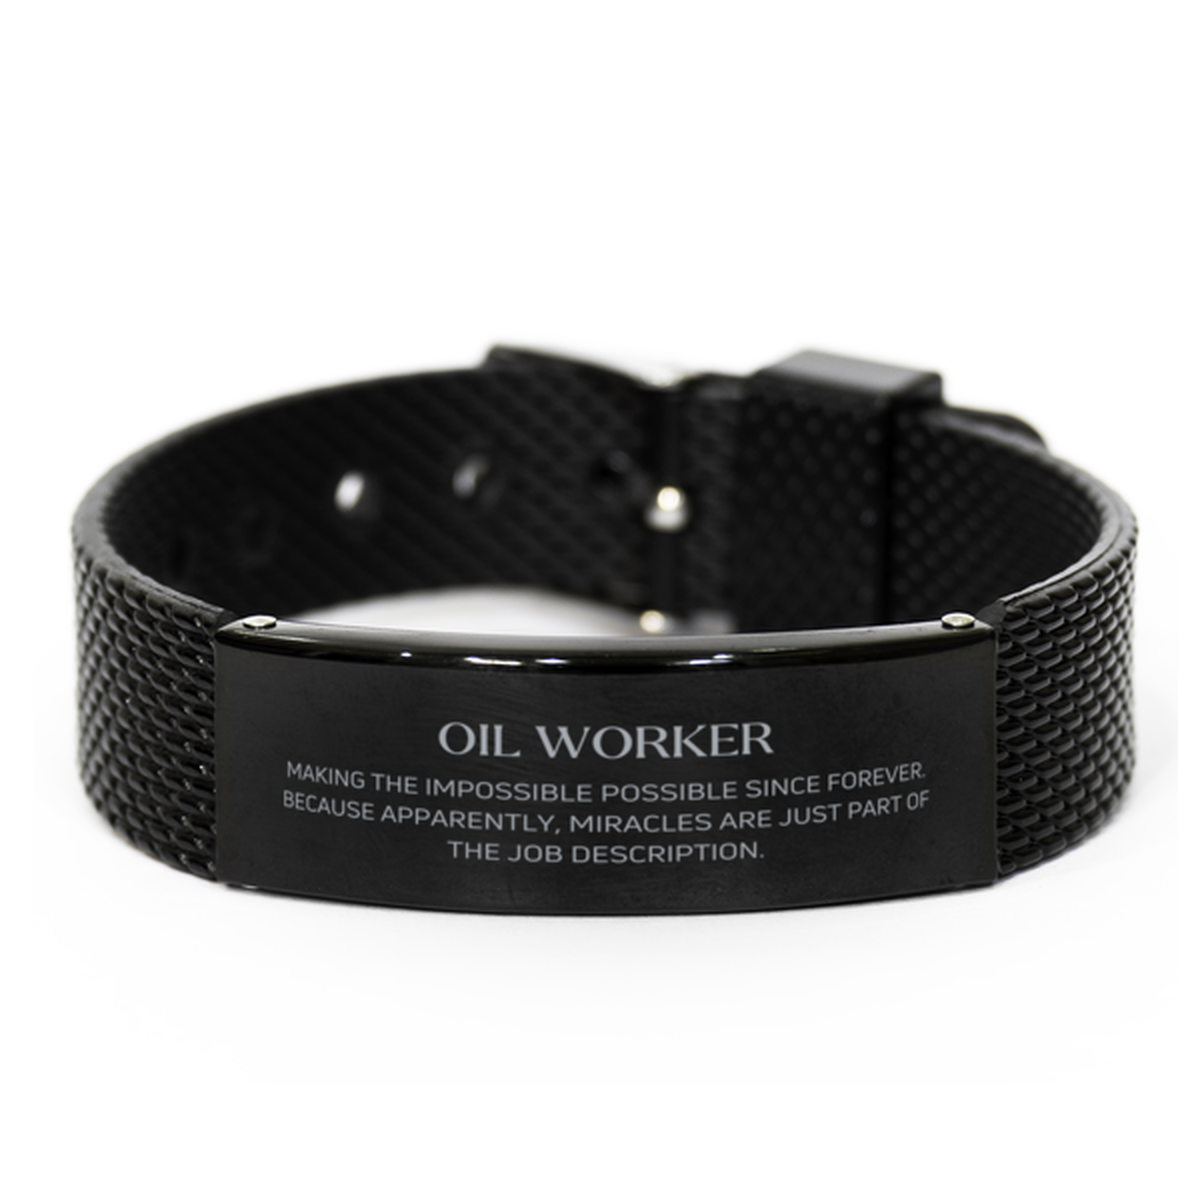 Funny Oil Worker Gifts, Miracles are just part of the job description, Inspirational Birthday Black Shark Mesh Bracelet For Oil Worker, Men, Women, Coworkers, Friends, Boss